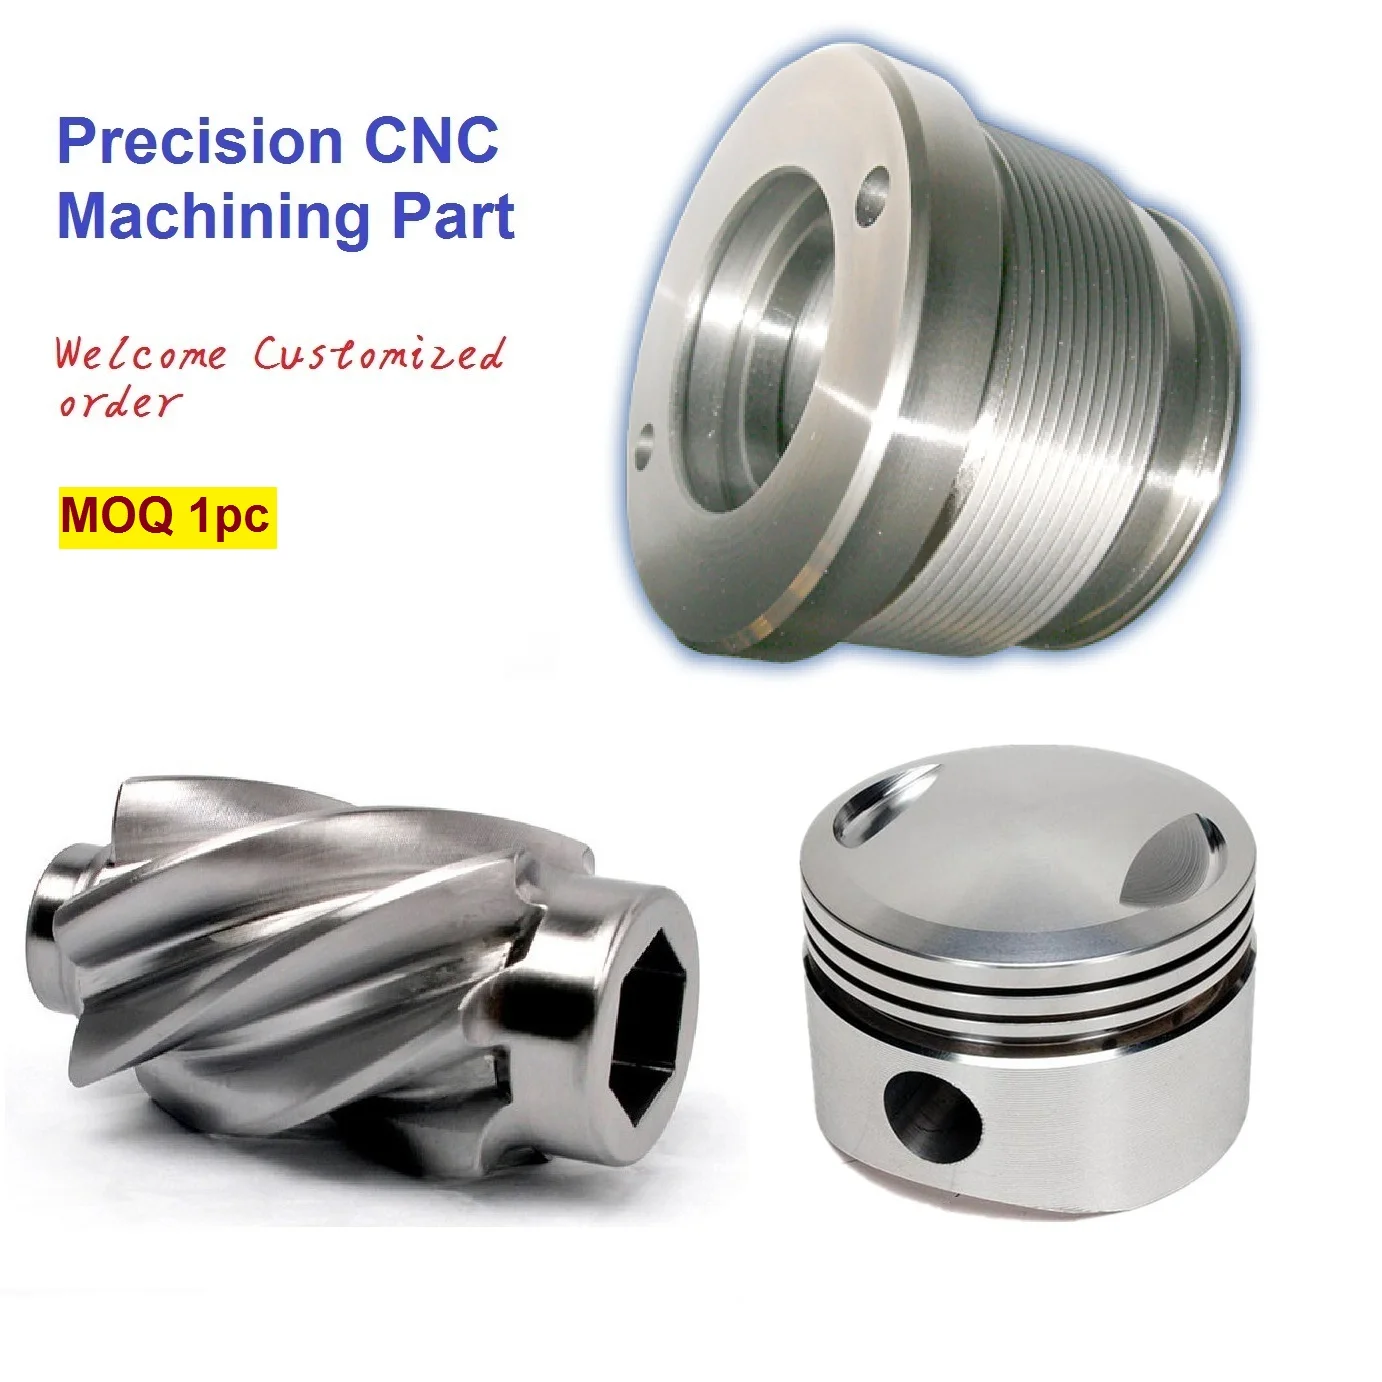 

15 Years OEM Custom Factory CNC Service Precision aviation 4 axis Stainless Steel Machining Manufacturing Turning Parts MOQ 1pc